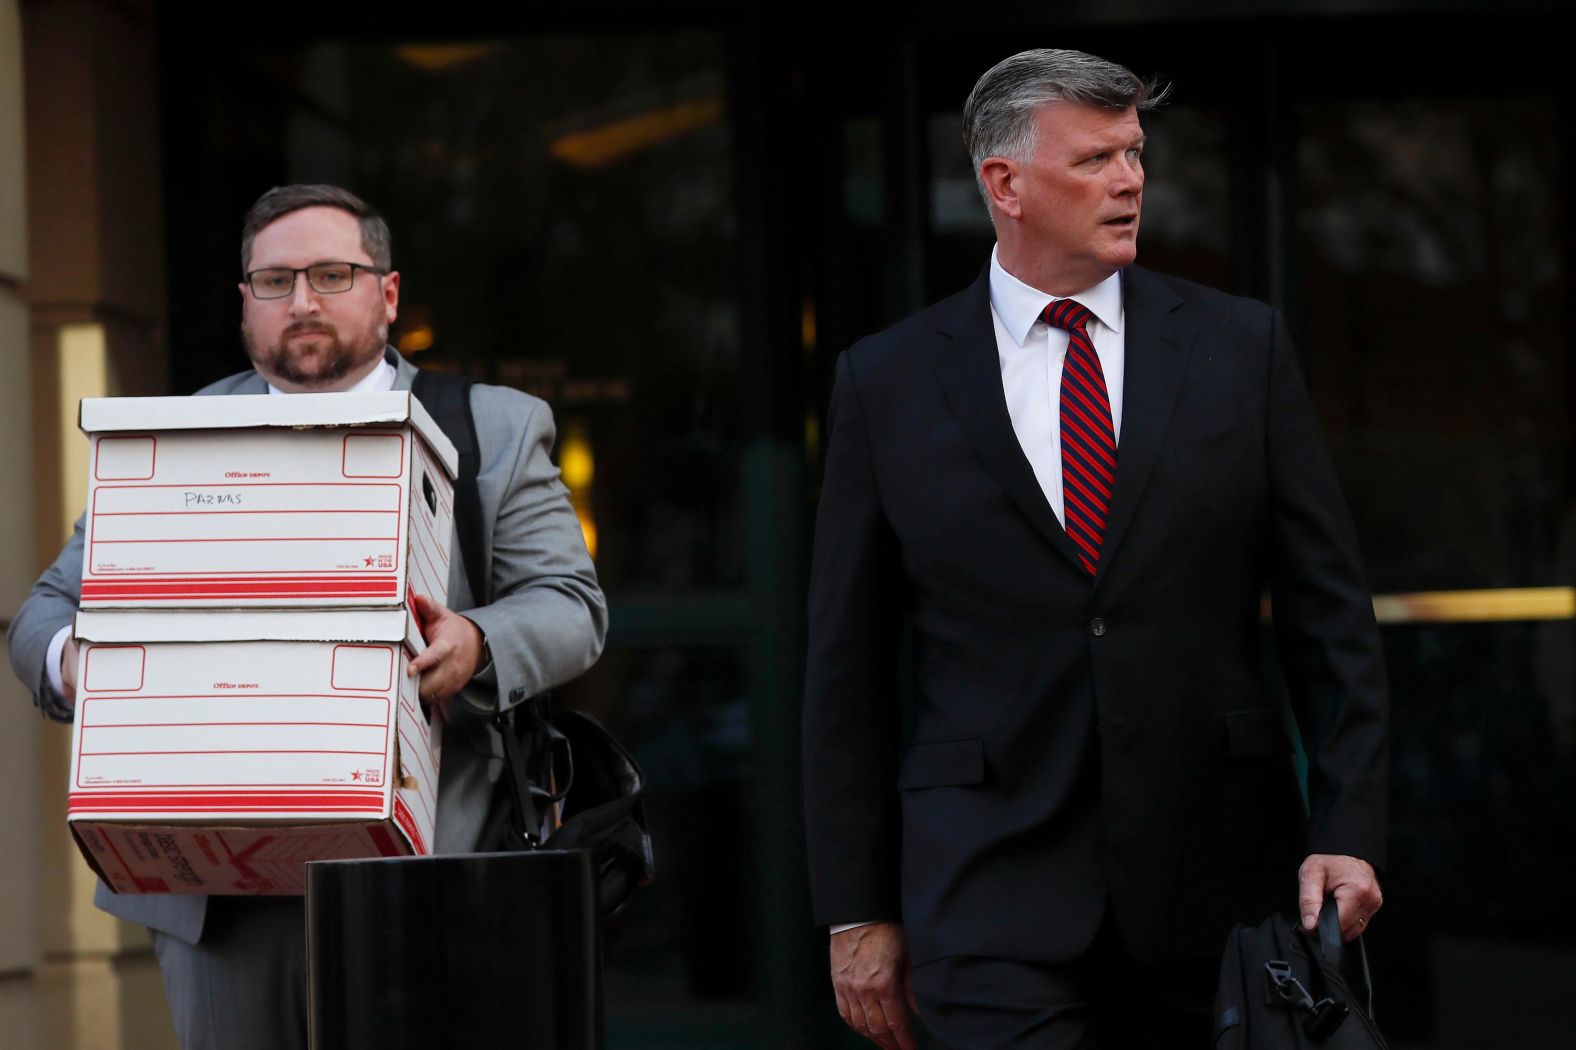 Kevin Downing, an attorney representing Lev Parnas and Igor Fruman, leaves a federal courthouse in Alexandria, Virginia, on October 10. House Democrats <a href="https://www.cnn.com/2019/10/10/politics/subpoenas-lev-parnas-igor-fruman/index.html" target="_blank">issued subpoenas to Parnas and Fruman,</a> who worked with Trump's personal attorney Rudy Giuliani to dig up dirt on the Bidens. Parnas and Fruman <a href="https://www.cnn.com/2019/10/10/politics/guliani-client-arrested-campaign-finance/index.html" target="_blank">were indicted by federal prosecutors</a> on the same day. The subpoenas are separate from the indictment, which alleges that Parnas and Fruman illegally funneled foreign money into US elections.